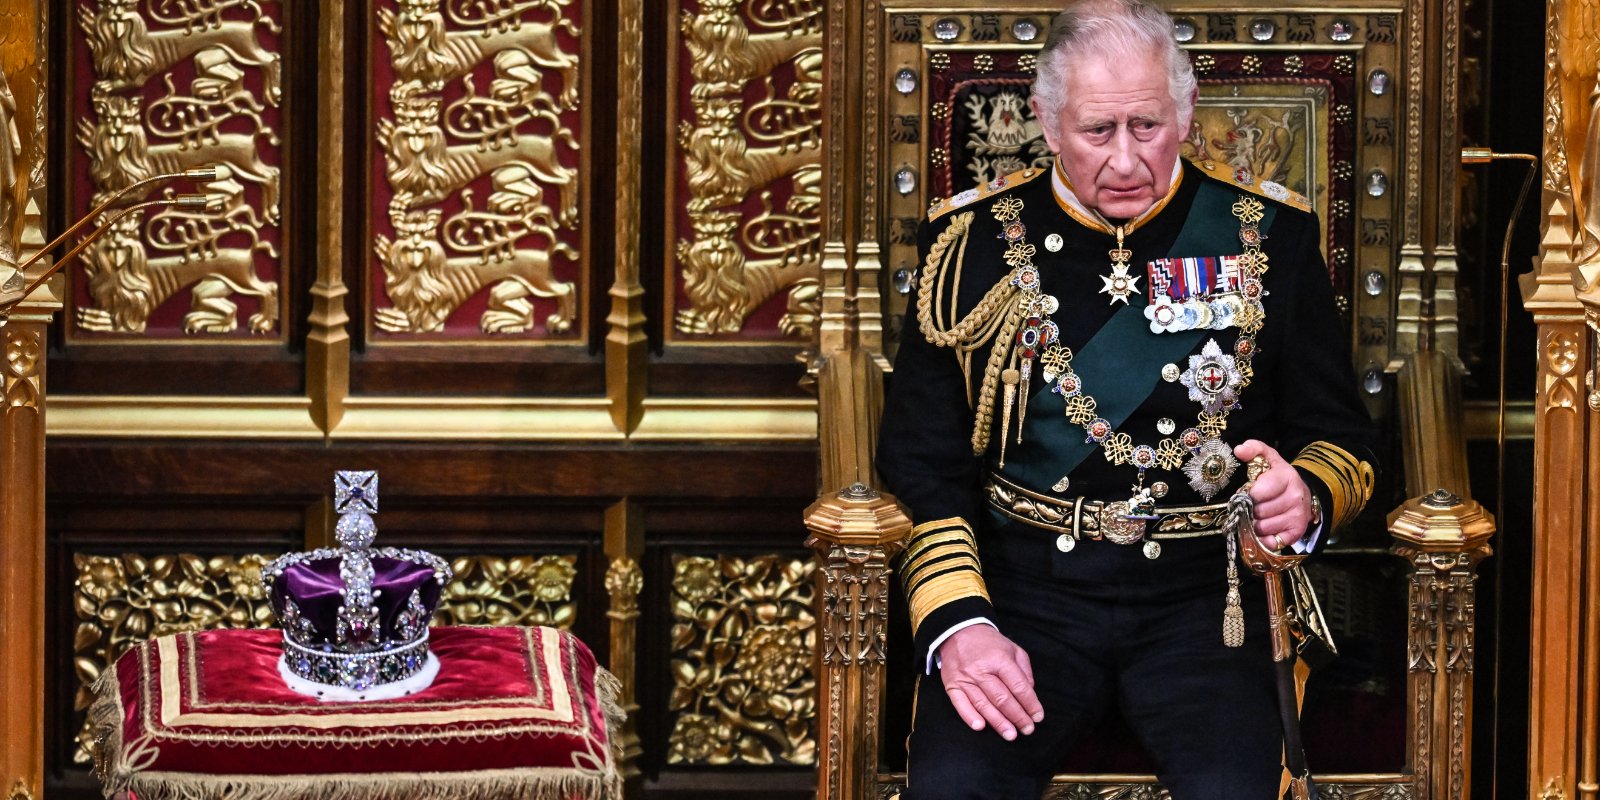 King Charles sits next to the Imperial State Crown during the State Opening of Parliament in the House of Lords at the Palace of Westminster on May 10, 2022 in London, England.